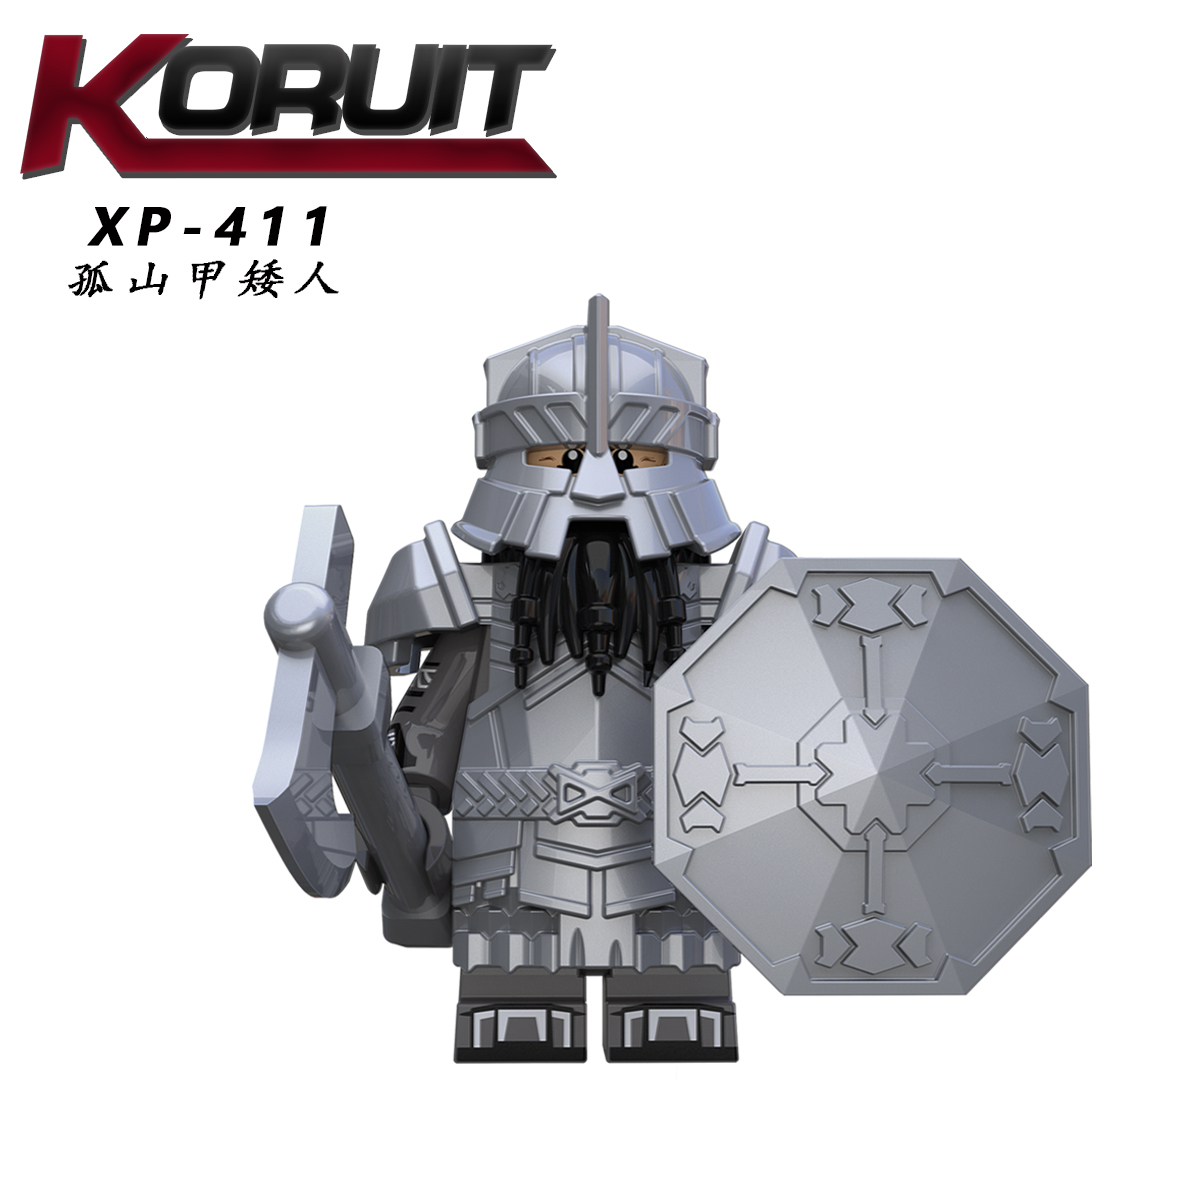 XP411 XP412 XP413 XP414 XP415 XP416 XP417 XP418 KT1054 Lord Of Rings Movie Series Characters Bricks Building Blocks Action Figures Educational Toys For Children's Gifts